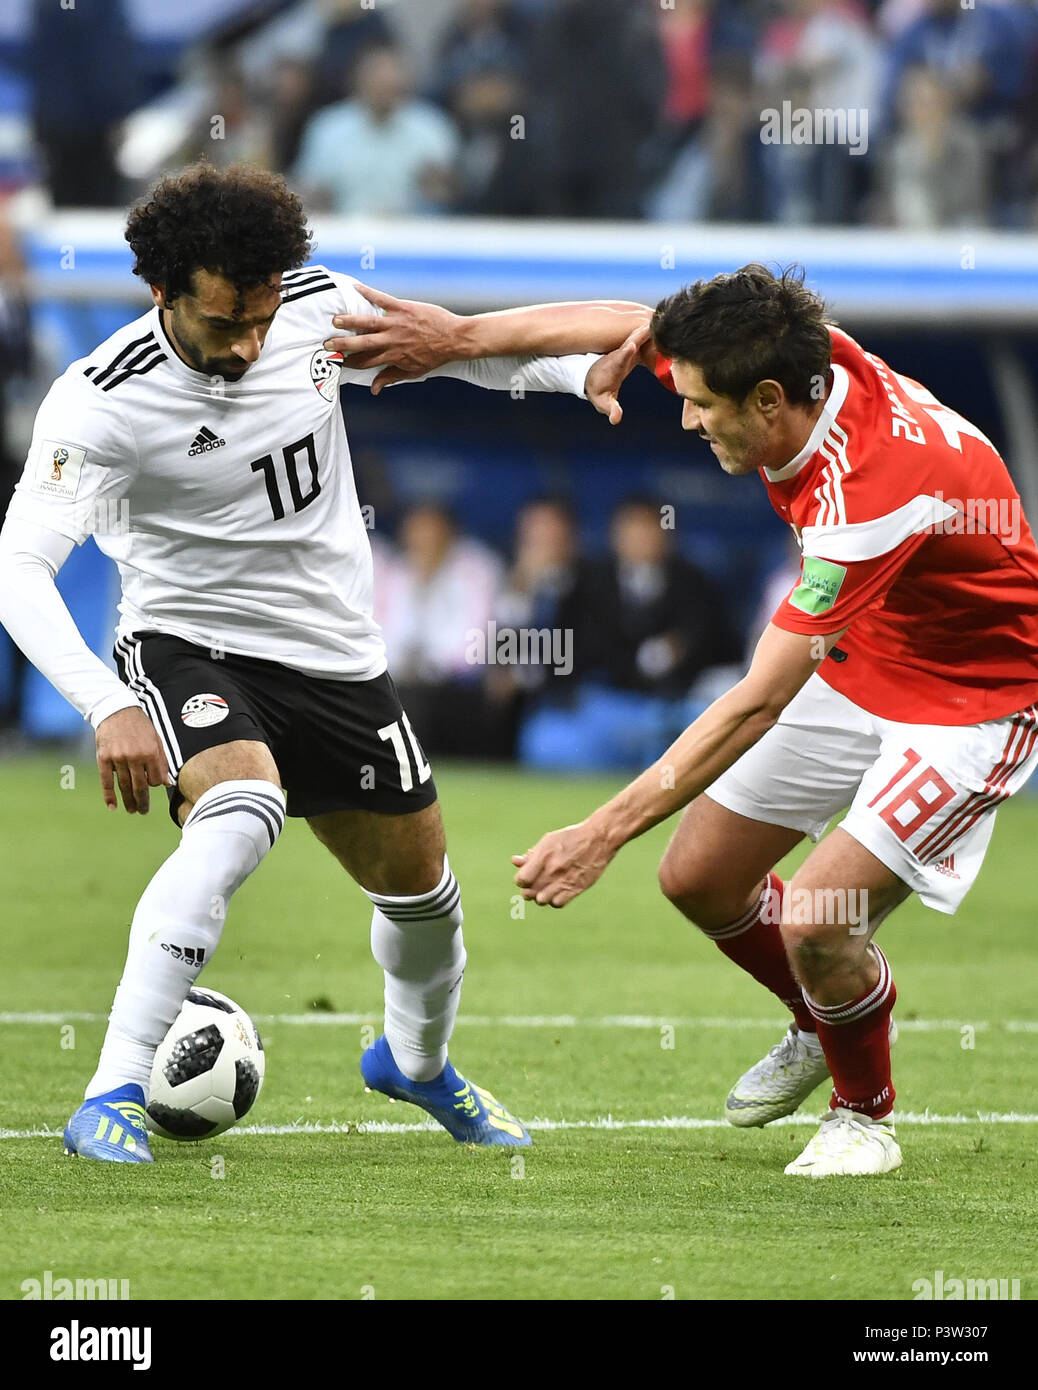 Saint Petersburg, Russia. 19th June, 2018. Mohamed Salah (L) of Egypt vies with Yury Zhirkov of Russia during a Group A match between Russia and Egypt at the 2018 FIFA World Cup in Saint Petersburg, Russia, June 19, 2018. Credit: Chen Yichen/Xinhua/Alamy Live News Stock Photo